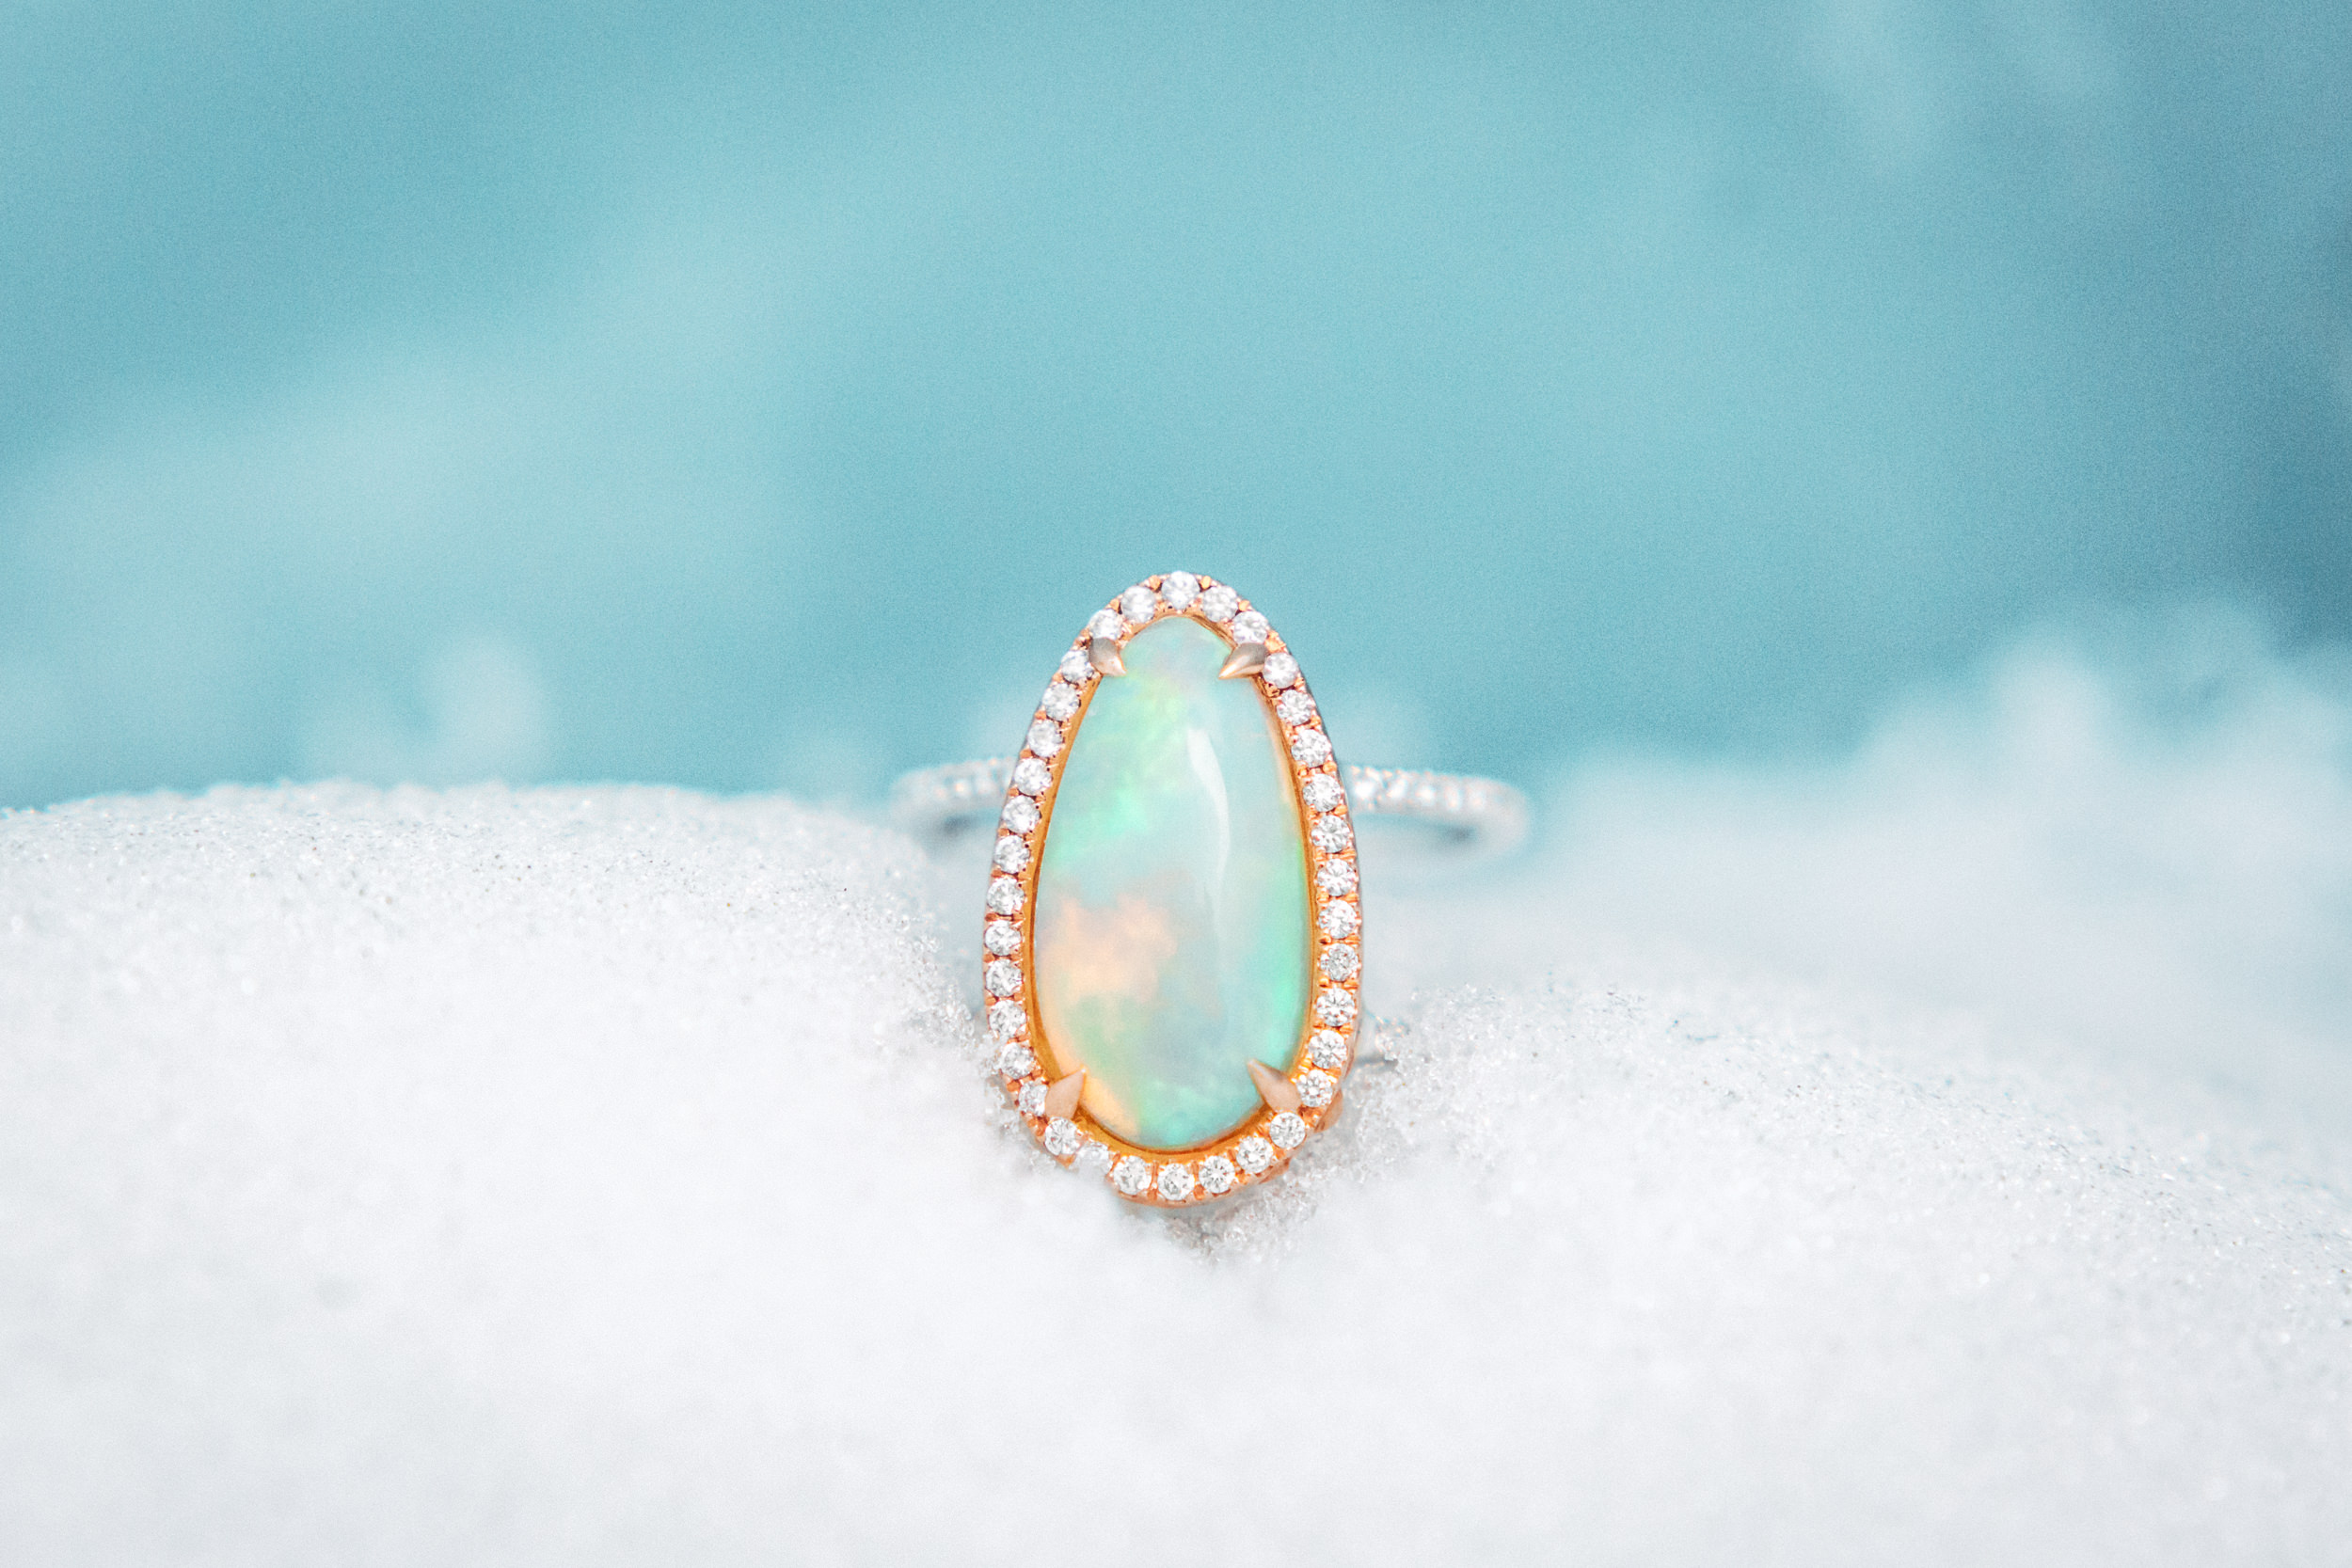 Opal ring in ice